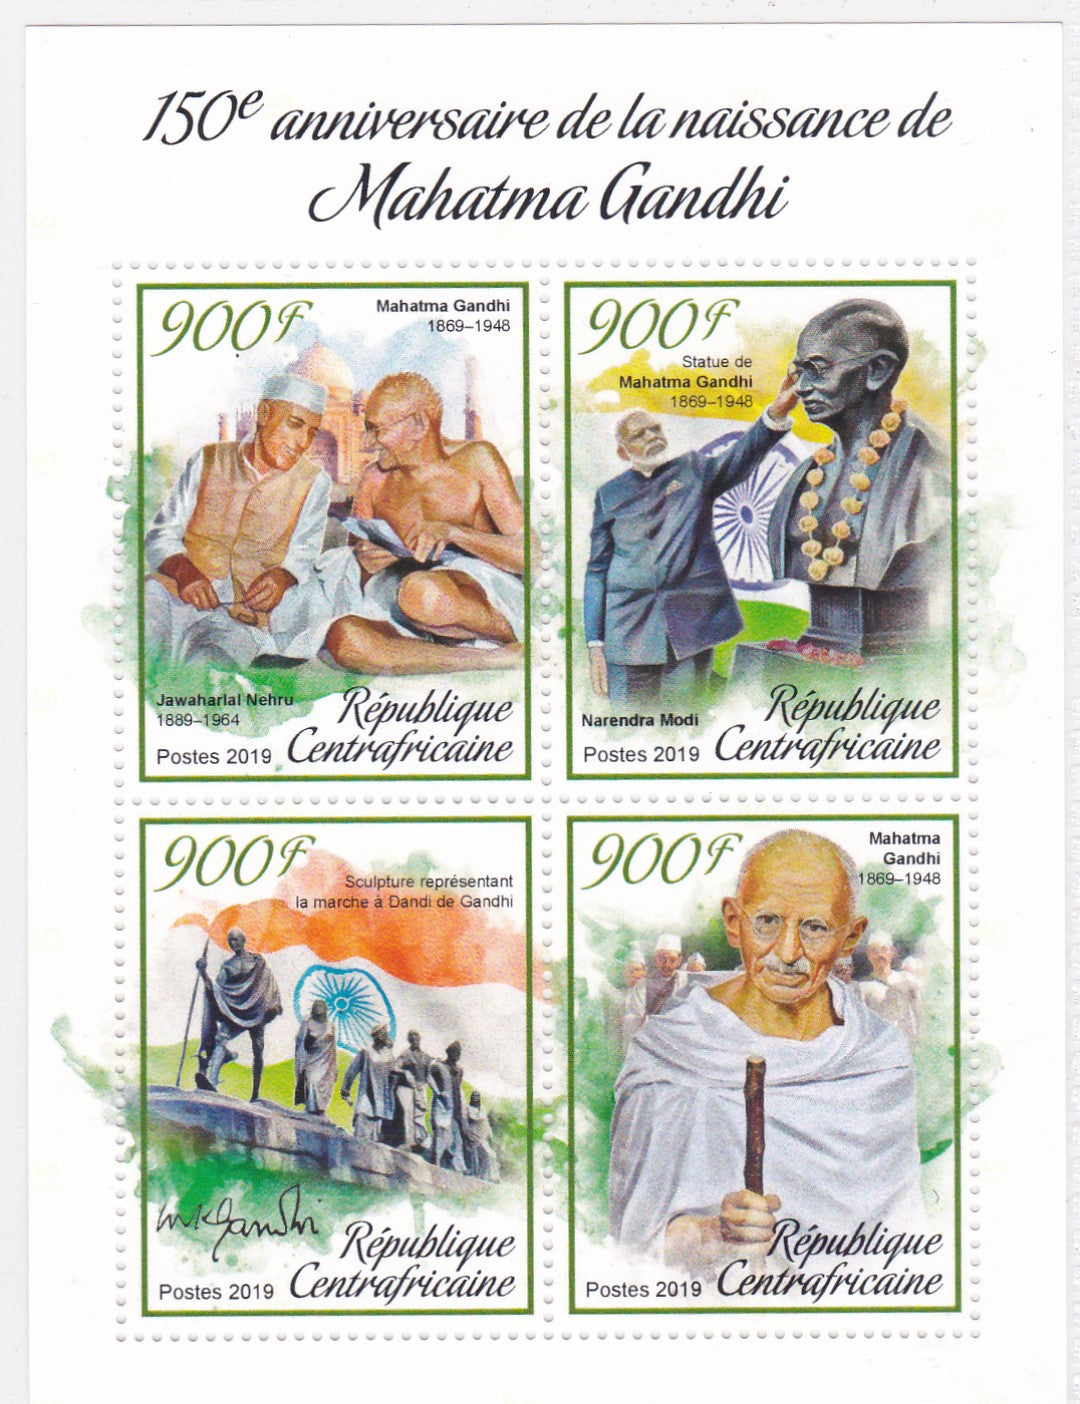 Stamps on PM-Narendra Modi from different countries